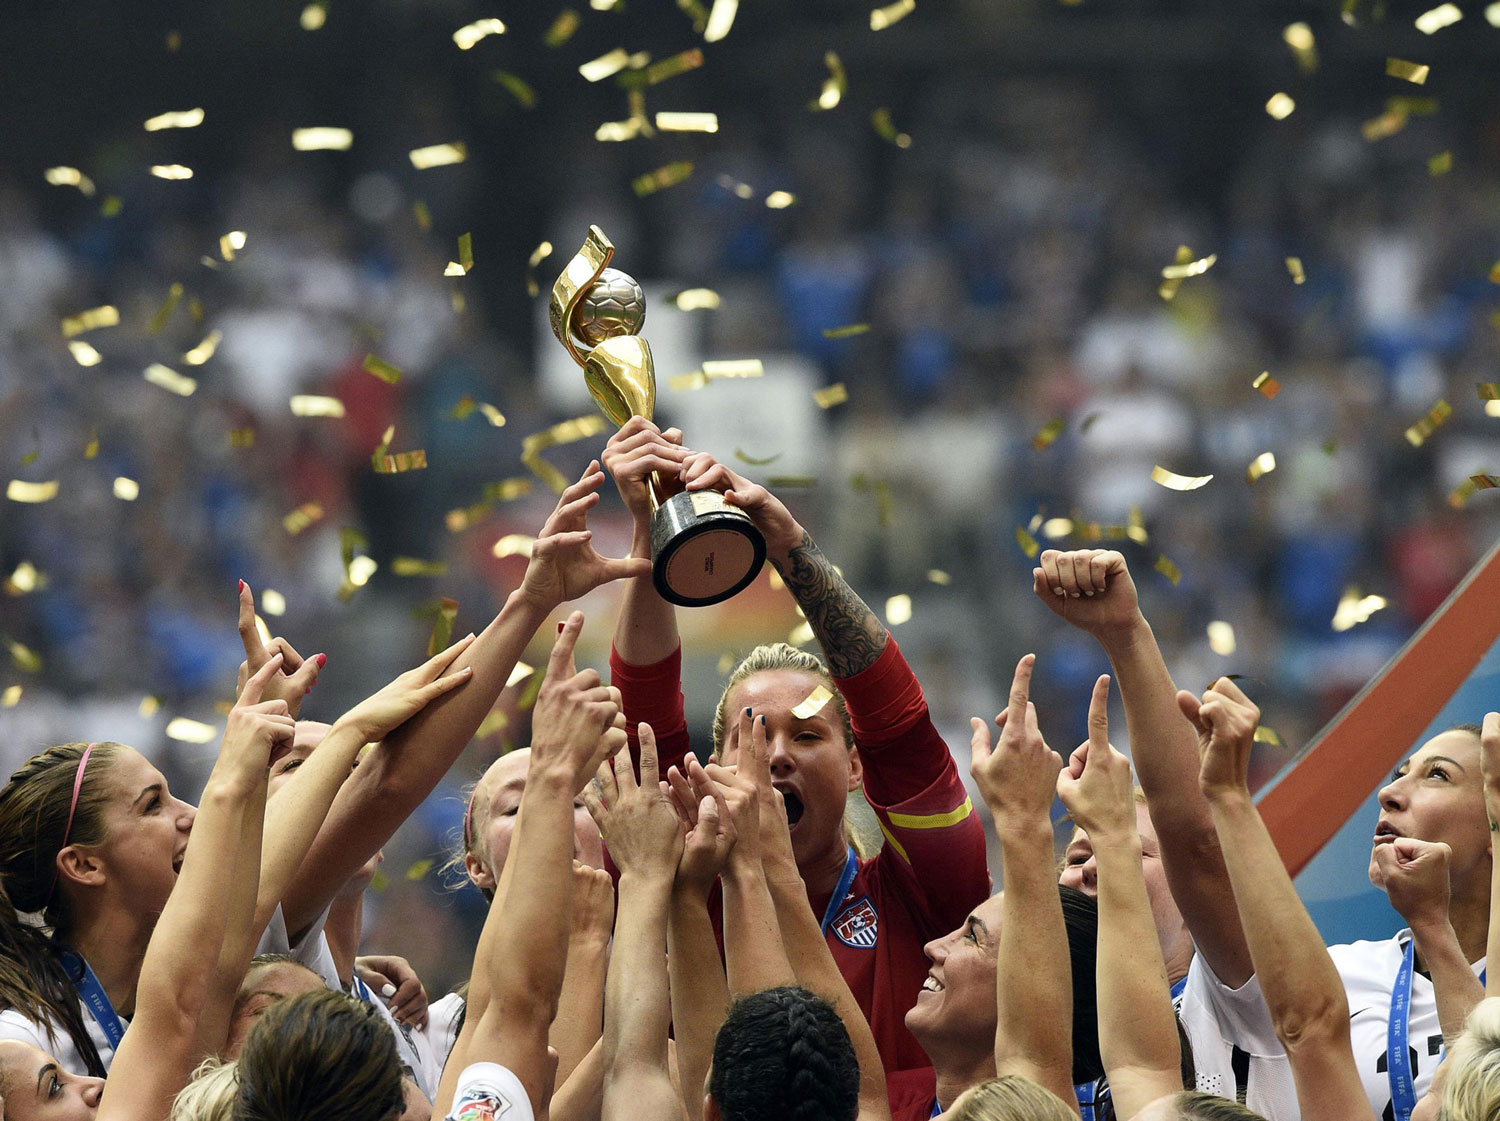 FIVE lessons from the FIFA Women’s World Cup that will enhance your